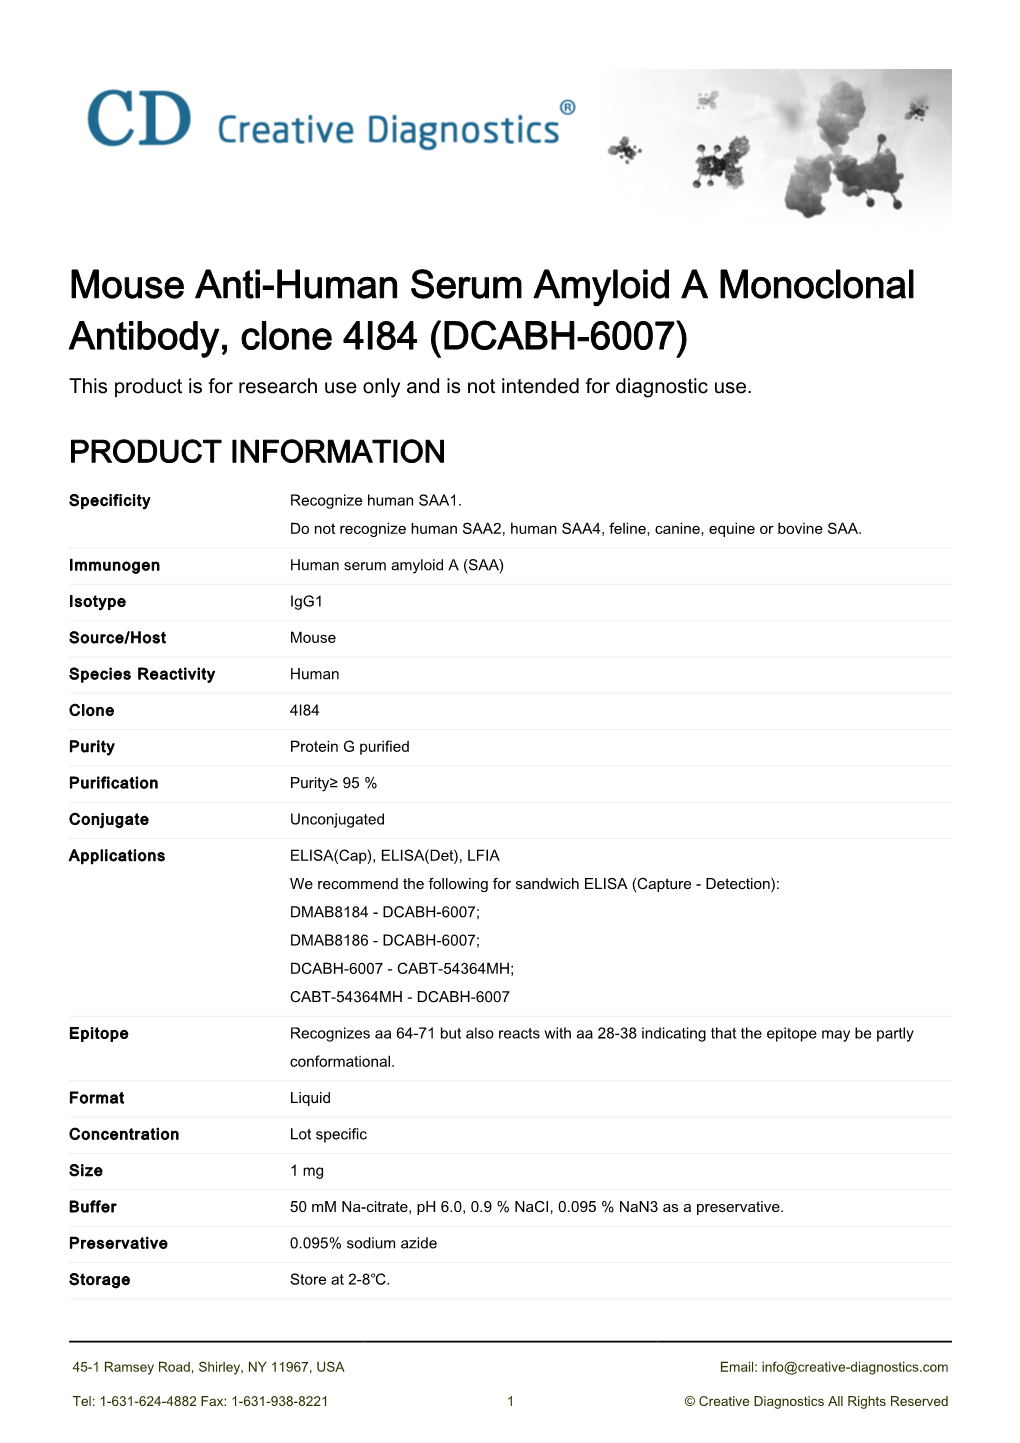 Mouse Anti-Human Serum Amyloid a Monoclonal Antibody, Clone 4I84 (DCABH-6007) This Product Is for Research Use Only and Is Not Intended for Diagnostic Use